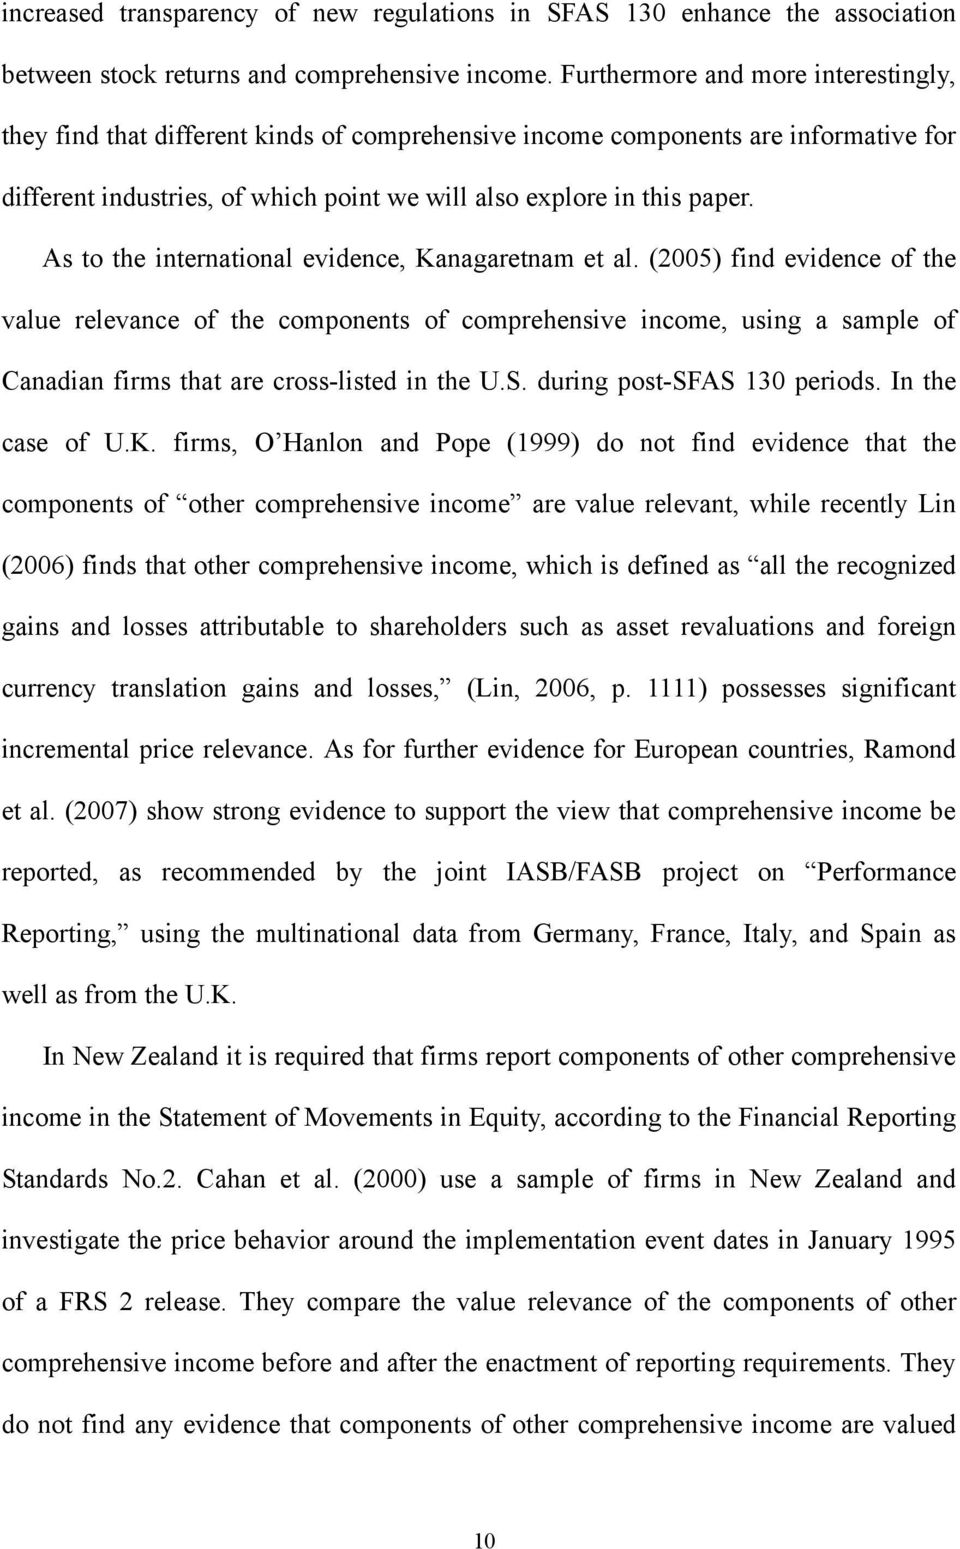 As o he inernaional evidence, Kanagarenam e al. (005) find evidence of he value relevance of he componens of comprehensive income, using a sample of Canadian firms ha are cross-lised in he U.S.